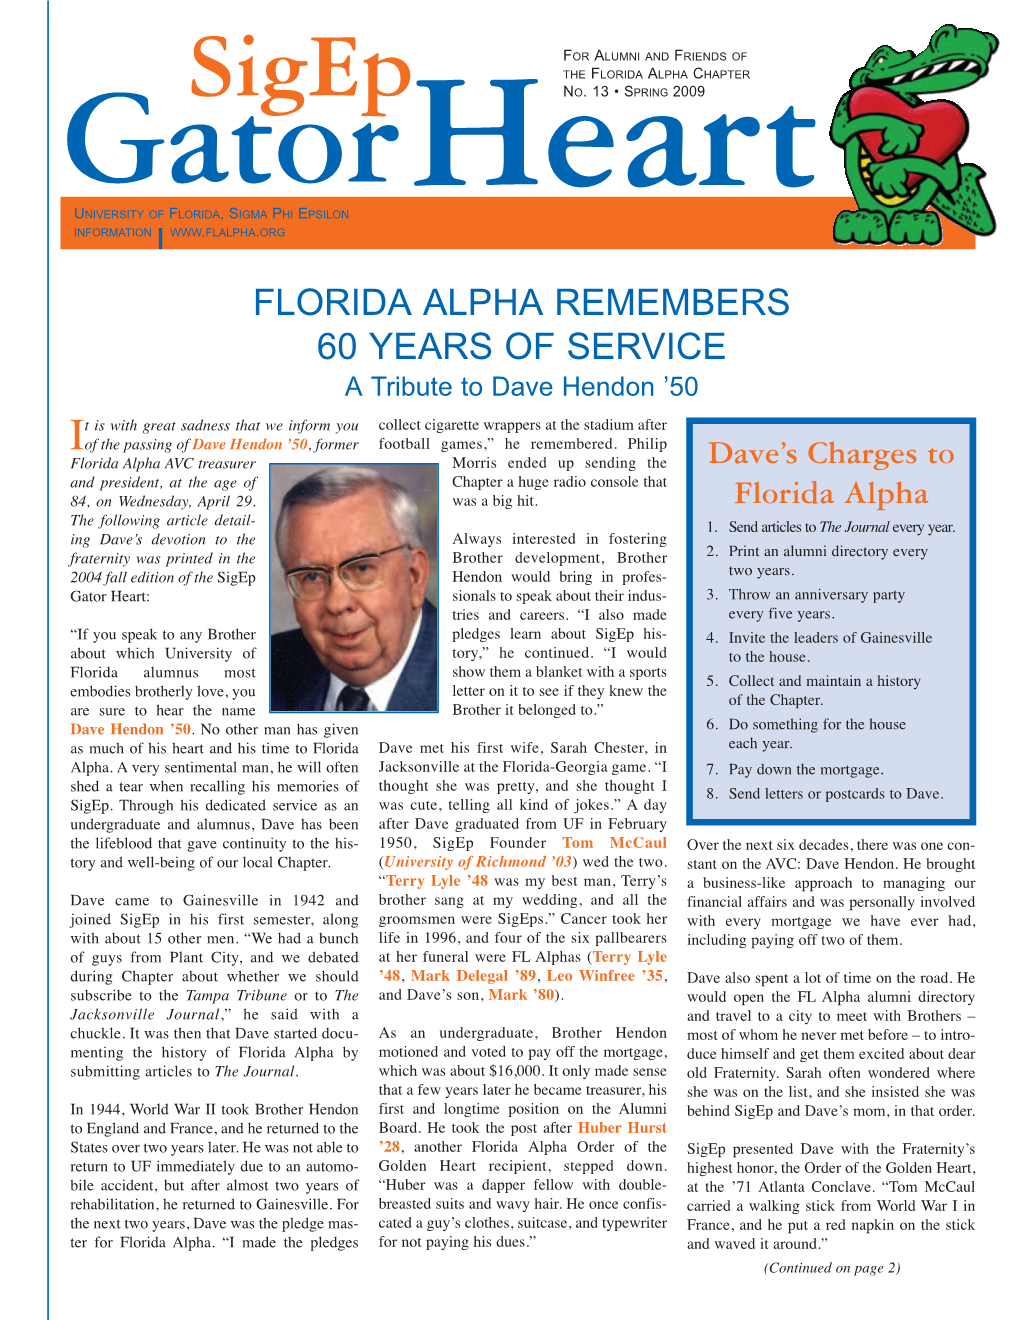 Florida Alpha Remembers 60 Years of Service a Tribute to Dave Hendon ’50